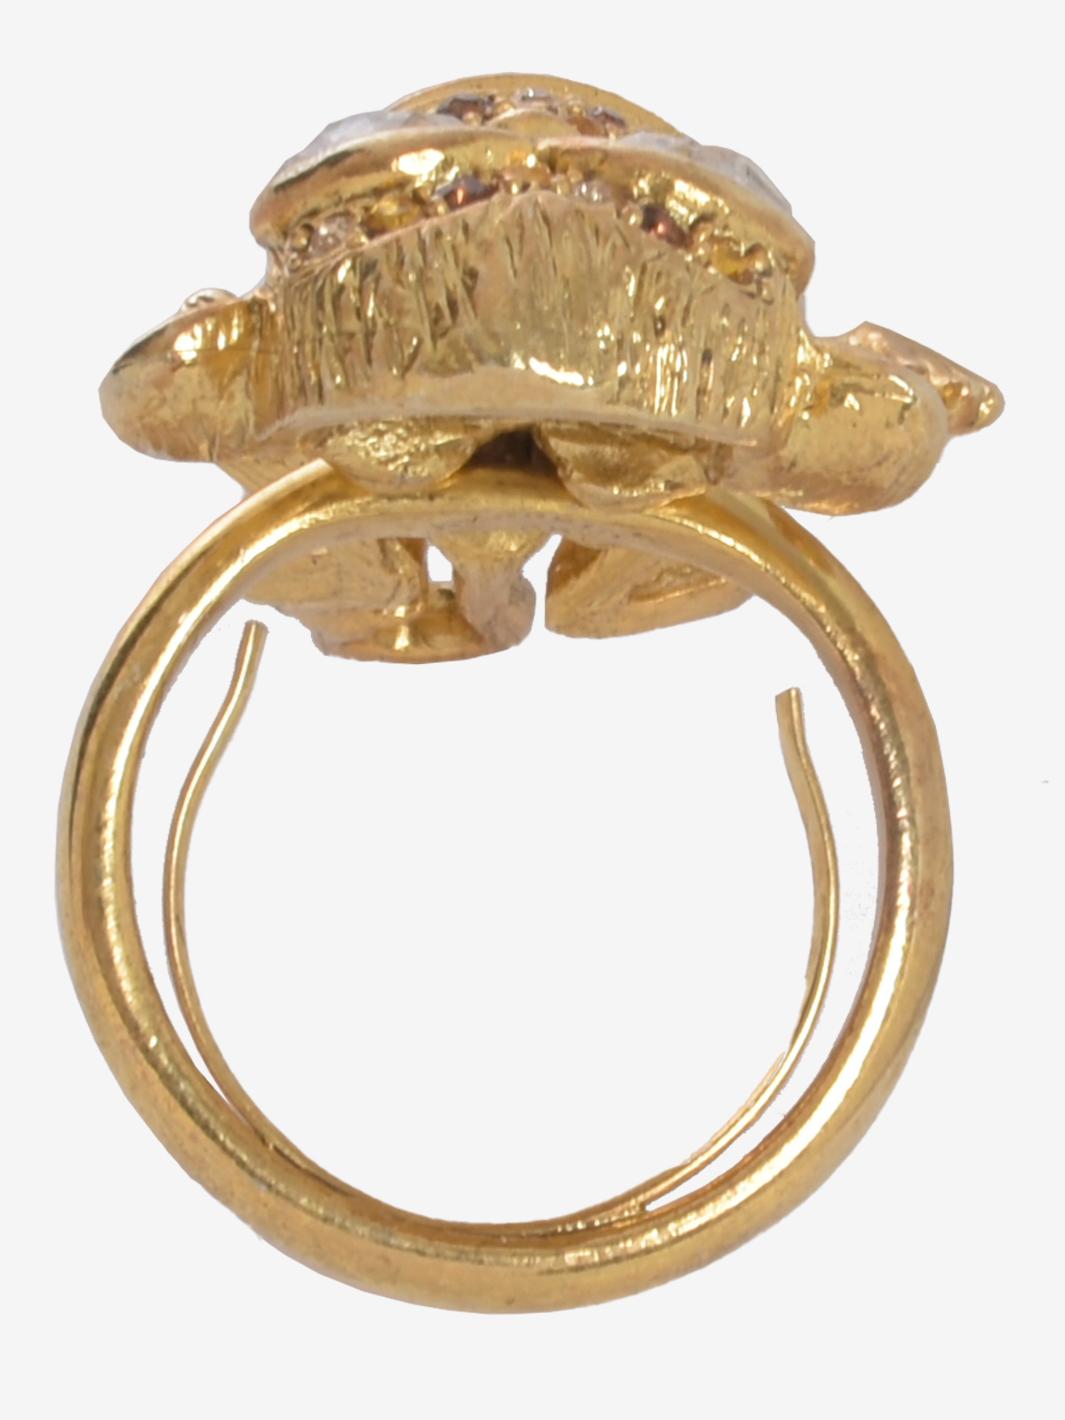 Kenneth Jay Lane Monkey Gold Ring is adaptable inside, inspired by the world of animals. White rhinestones, Hamilton gold American pewter casting.

STATE OF PRESERVATION
Good condition

COMPOSITION
White rhinestones
Hamilton gold American pewter